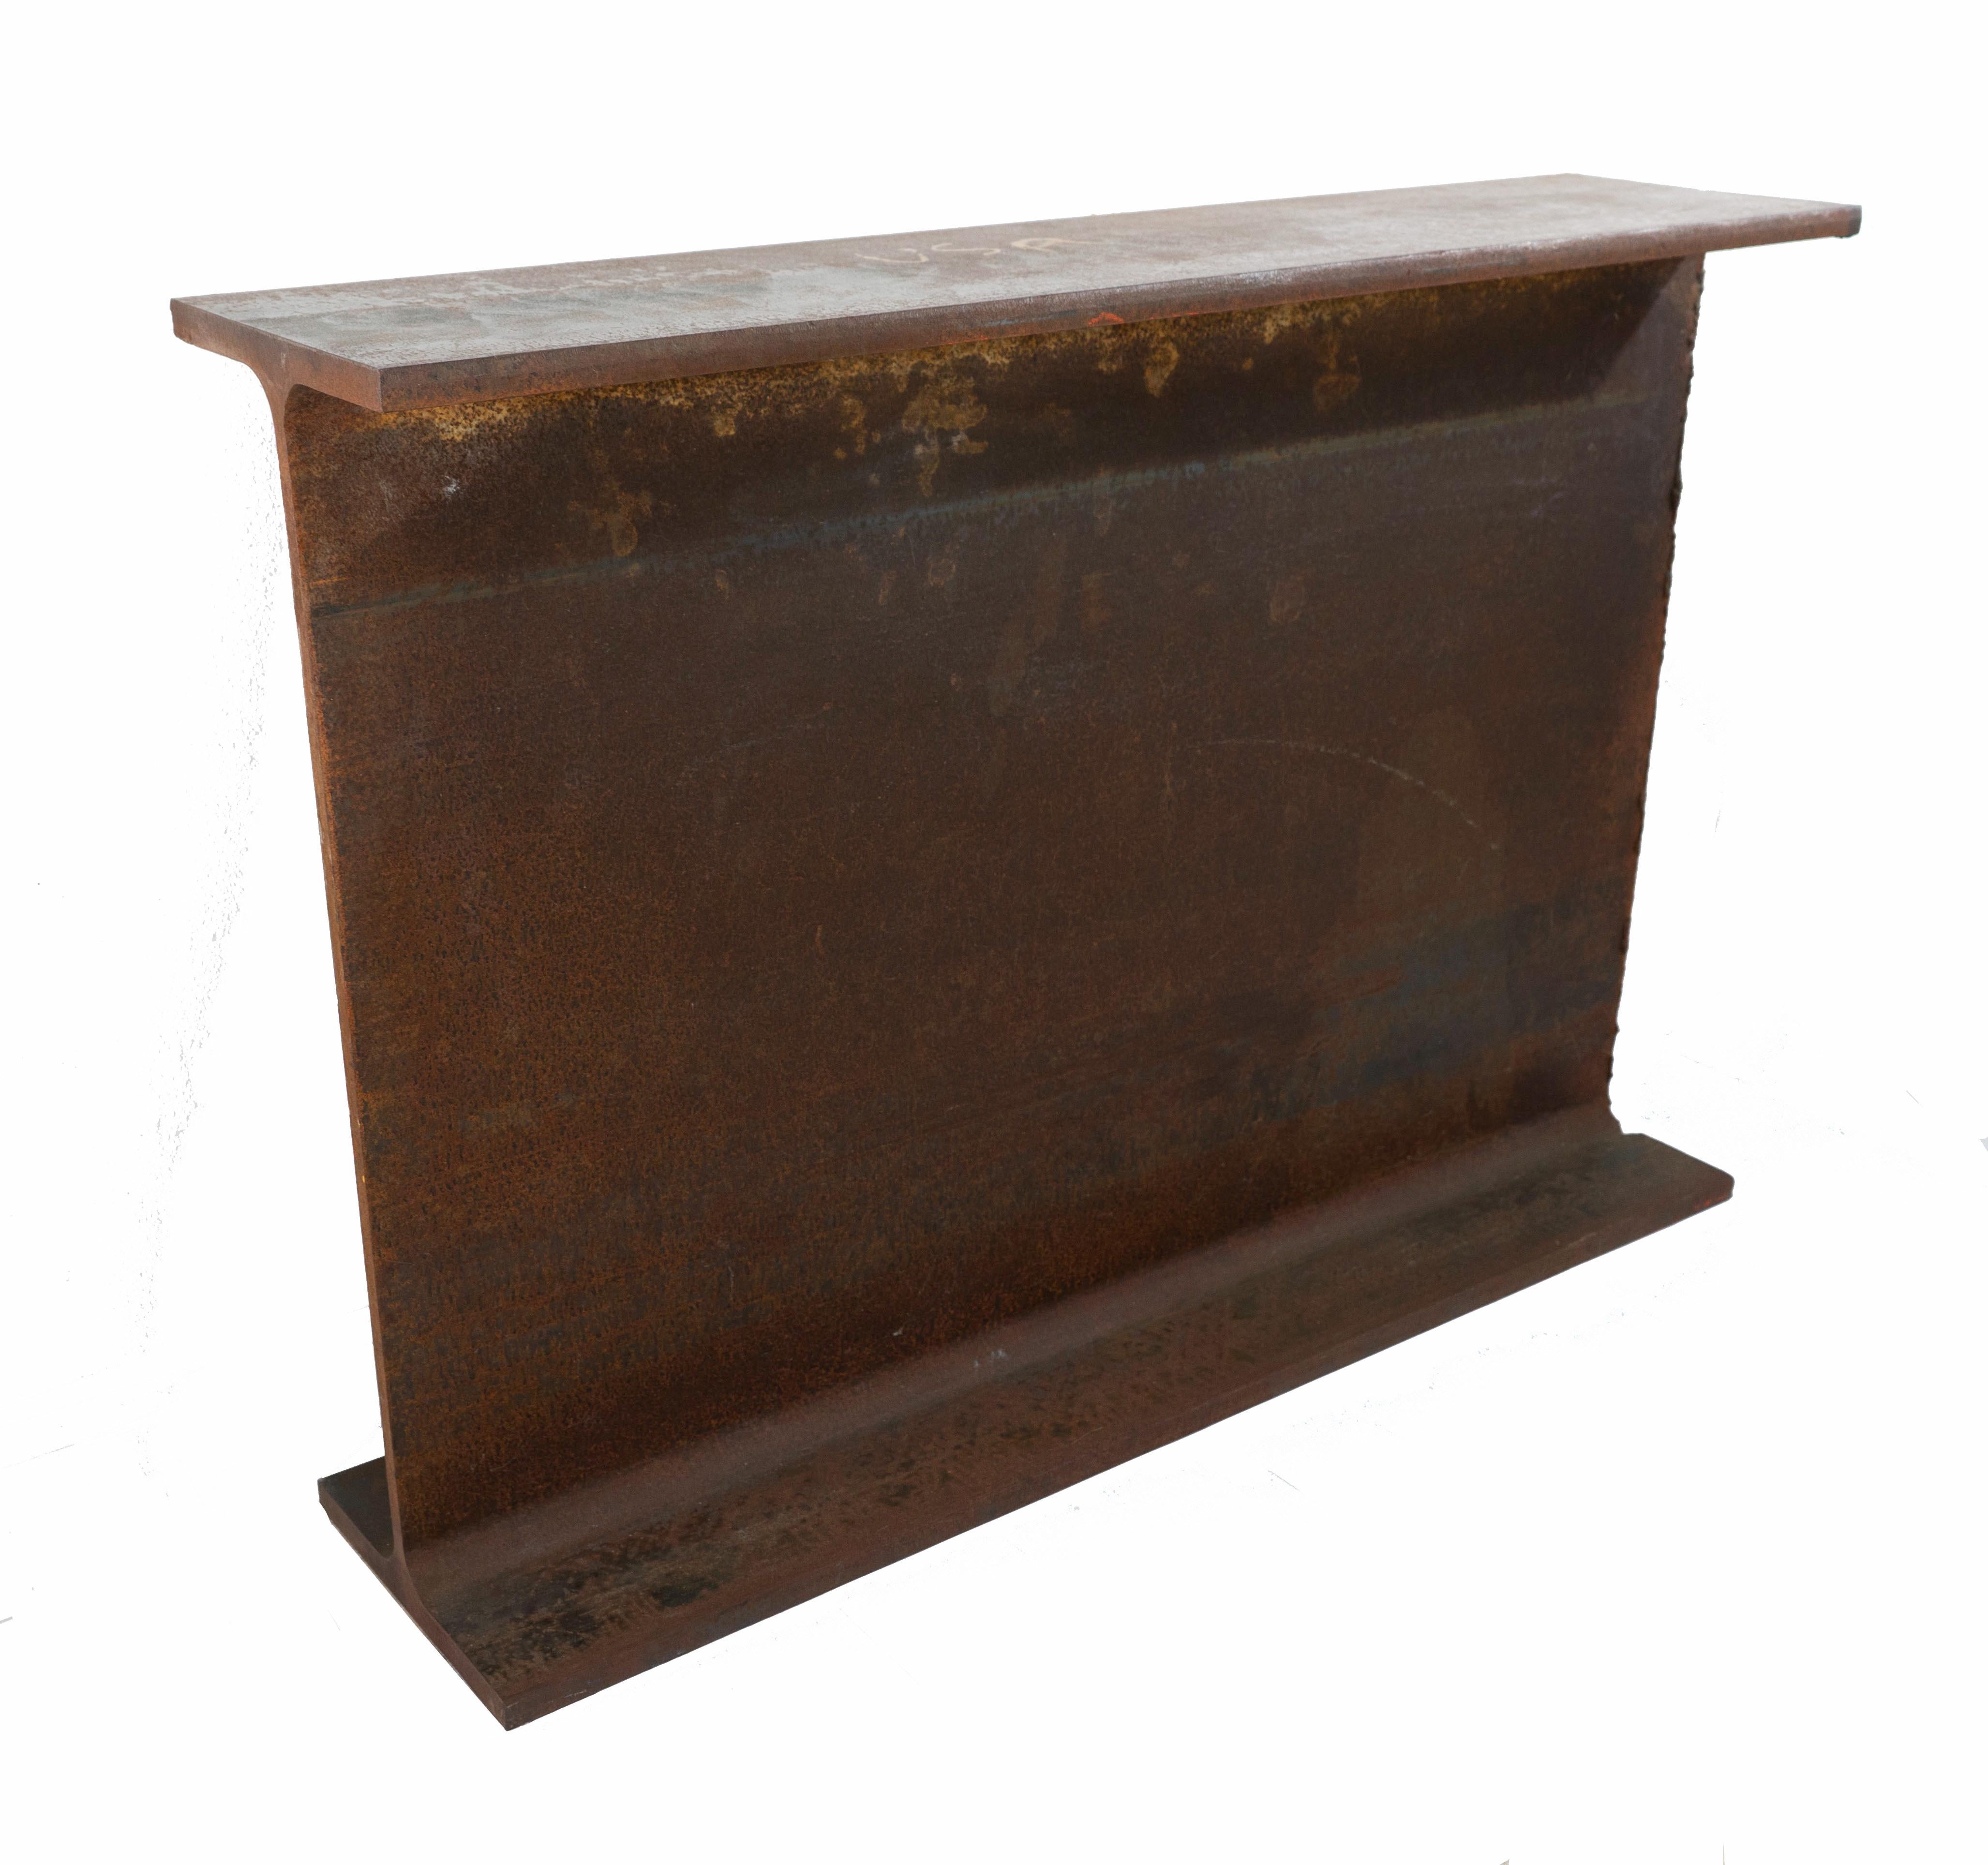 Made to Order, 21st century, Industrial, Rusted Steel, Contemporary, I-Beam Console Table by Edelman New York. 

Edelman New York (ENY) is a multi-disciplinary luxury design firm specializing in interiors, custom furniture, and leather goods. Our